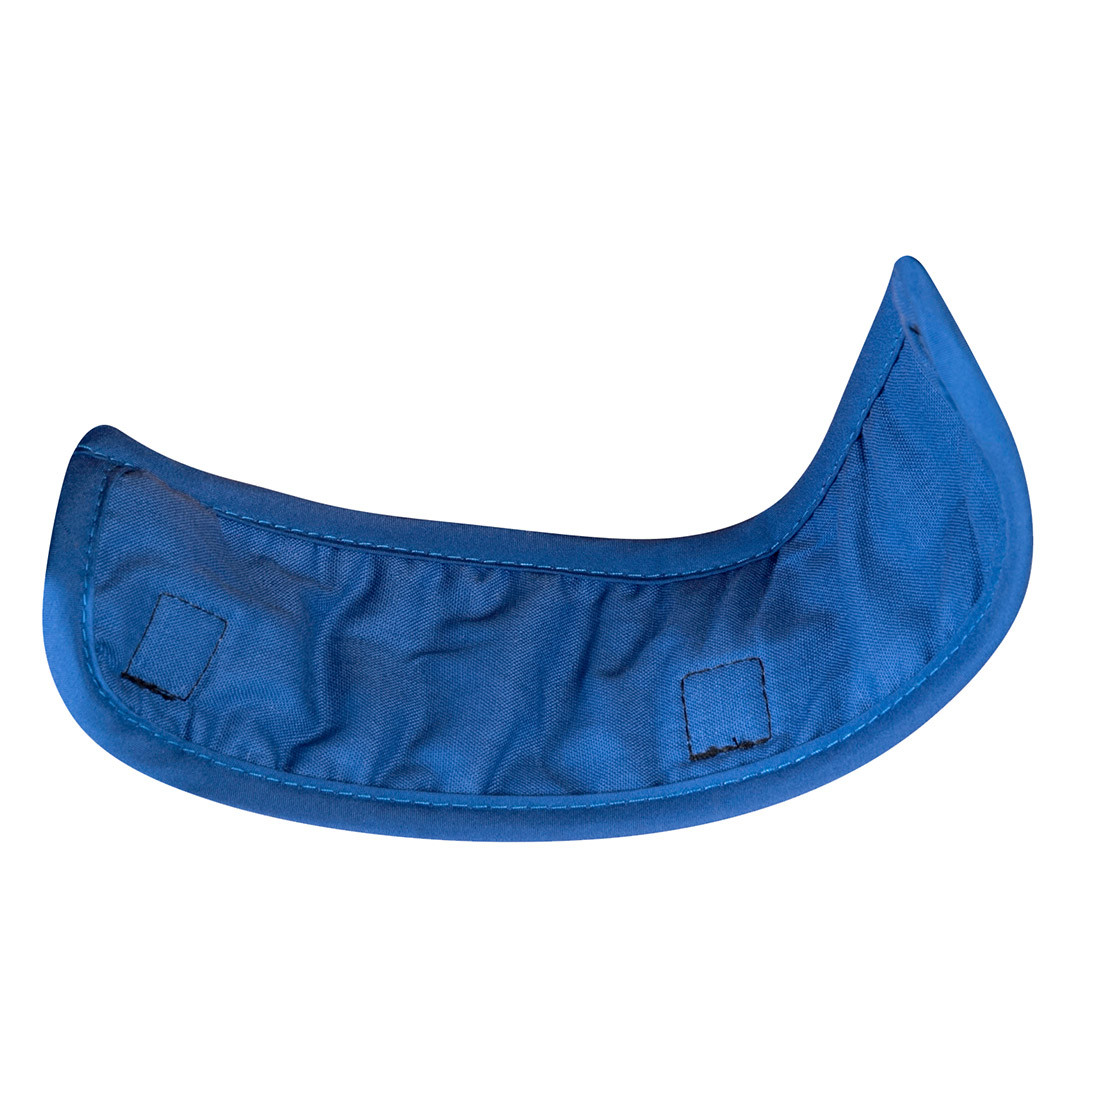 Cooling Helmet Sweatband - Personal protection